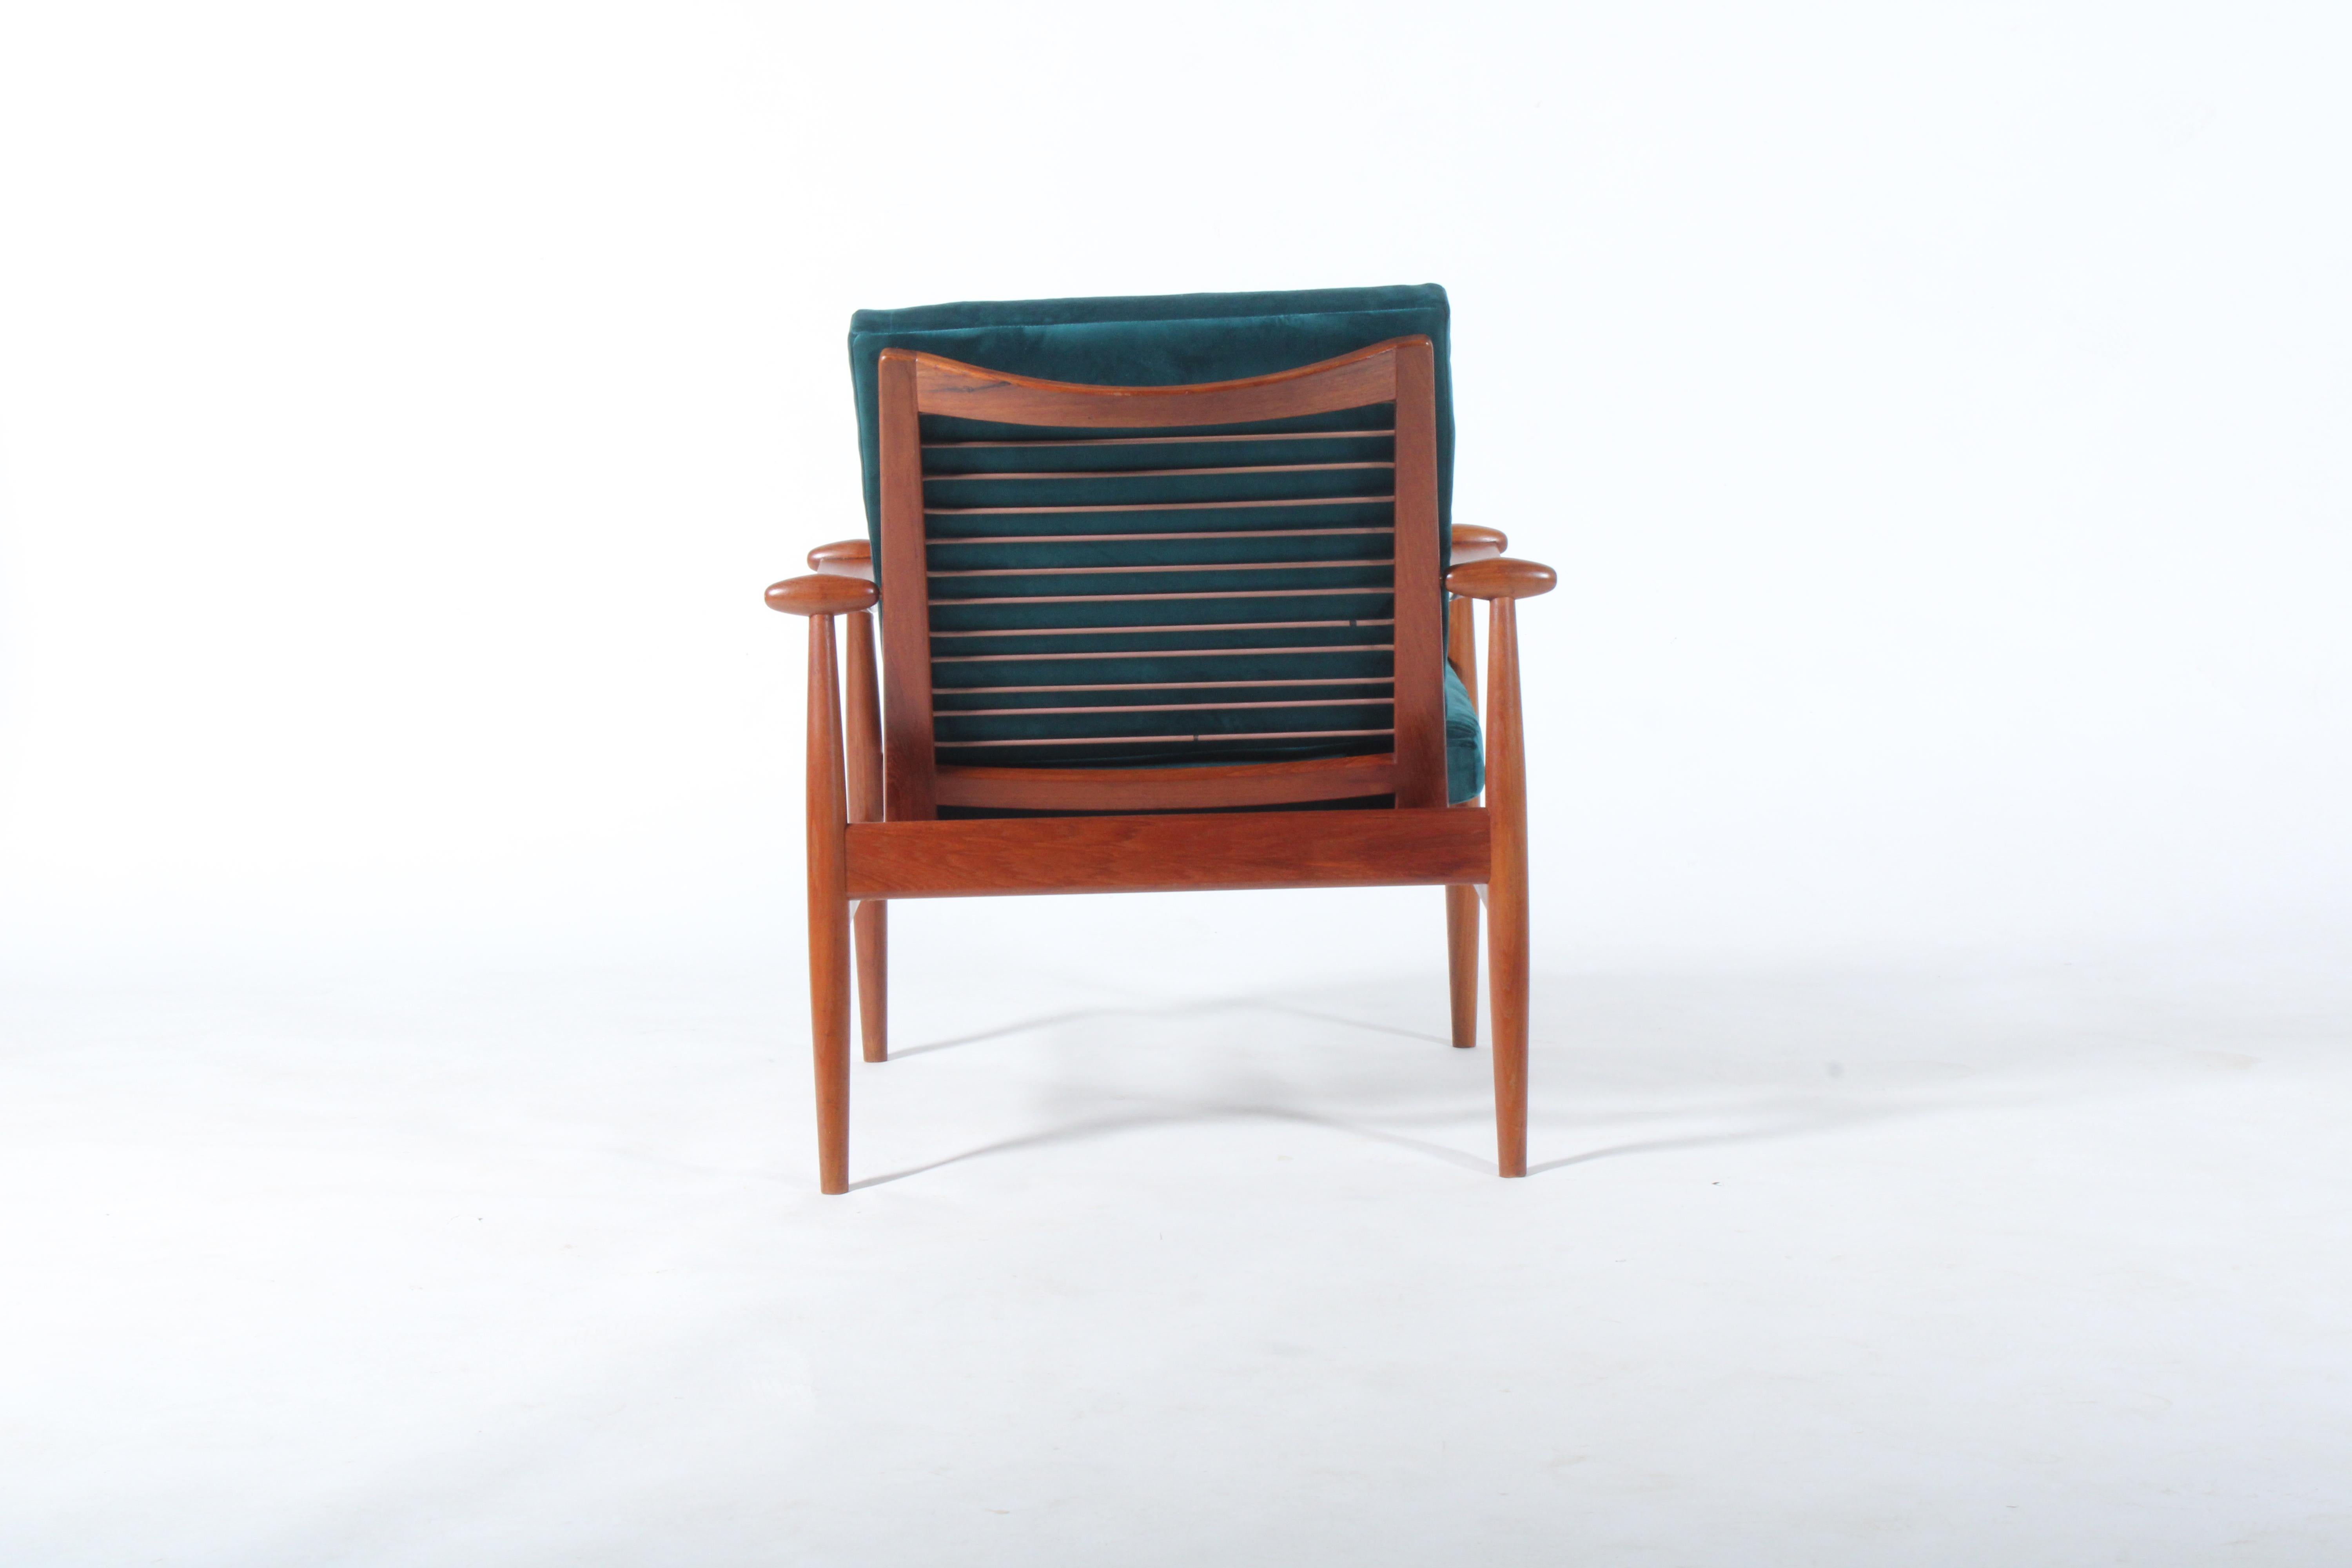 Exquisite Mid Century Danish Spade Chair By Finn Juhl For France & Son In Teak For Sale 5